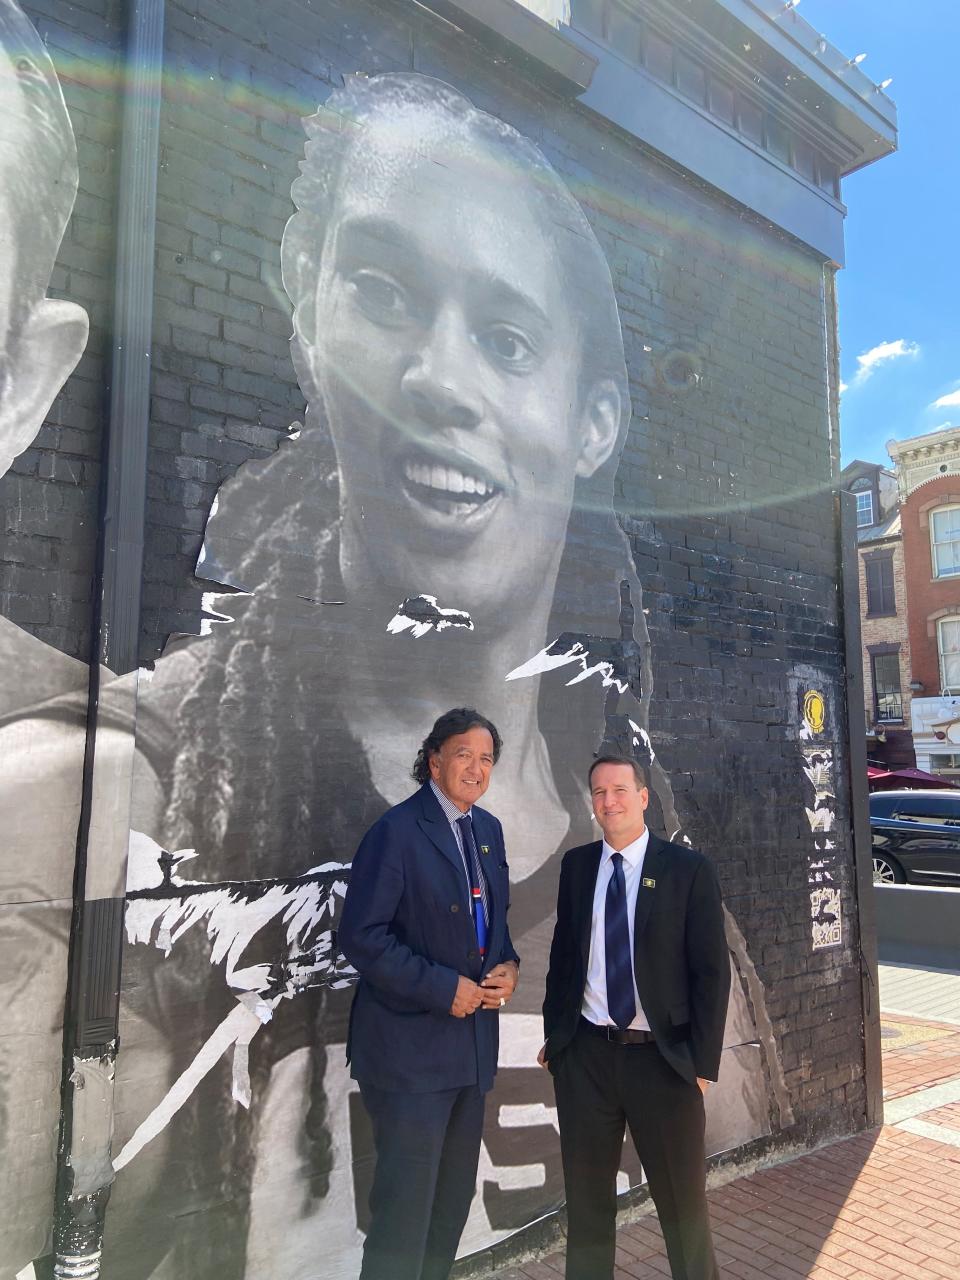 Mickey Bergman, right, and Bill Richardson, a former U.S. ambassador to the United Nations, in 2022 at a mural in Washington, D.C., depicting U.S. hostages detained abroad. Behind them is the image of Brittney Griner, the two-time Olympic gold medalist basketball player who was released from Russia that December in a prisoner exchange.